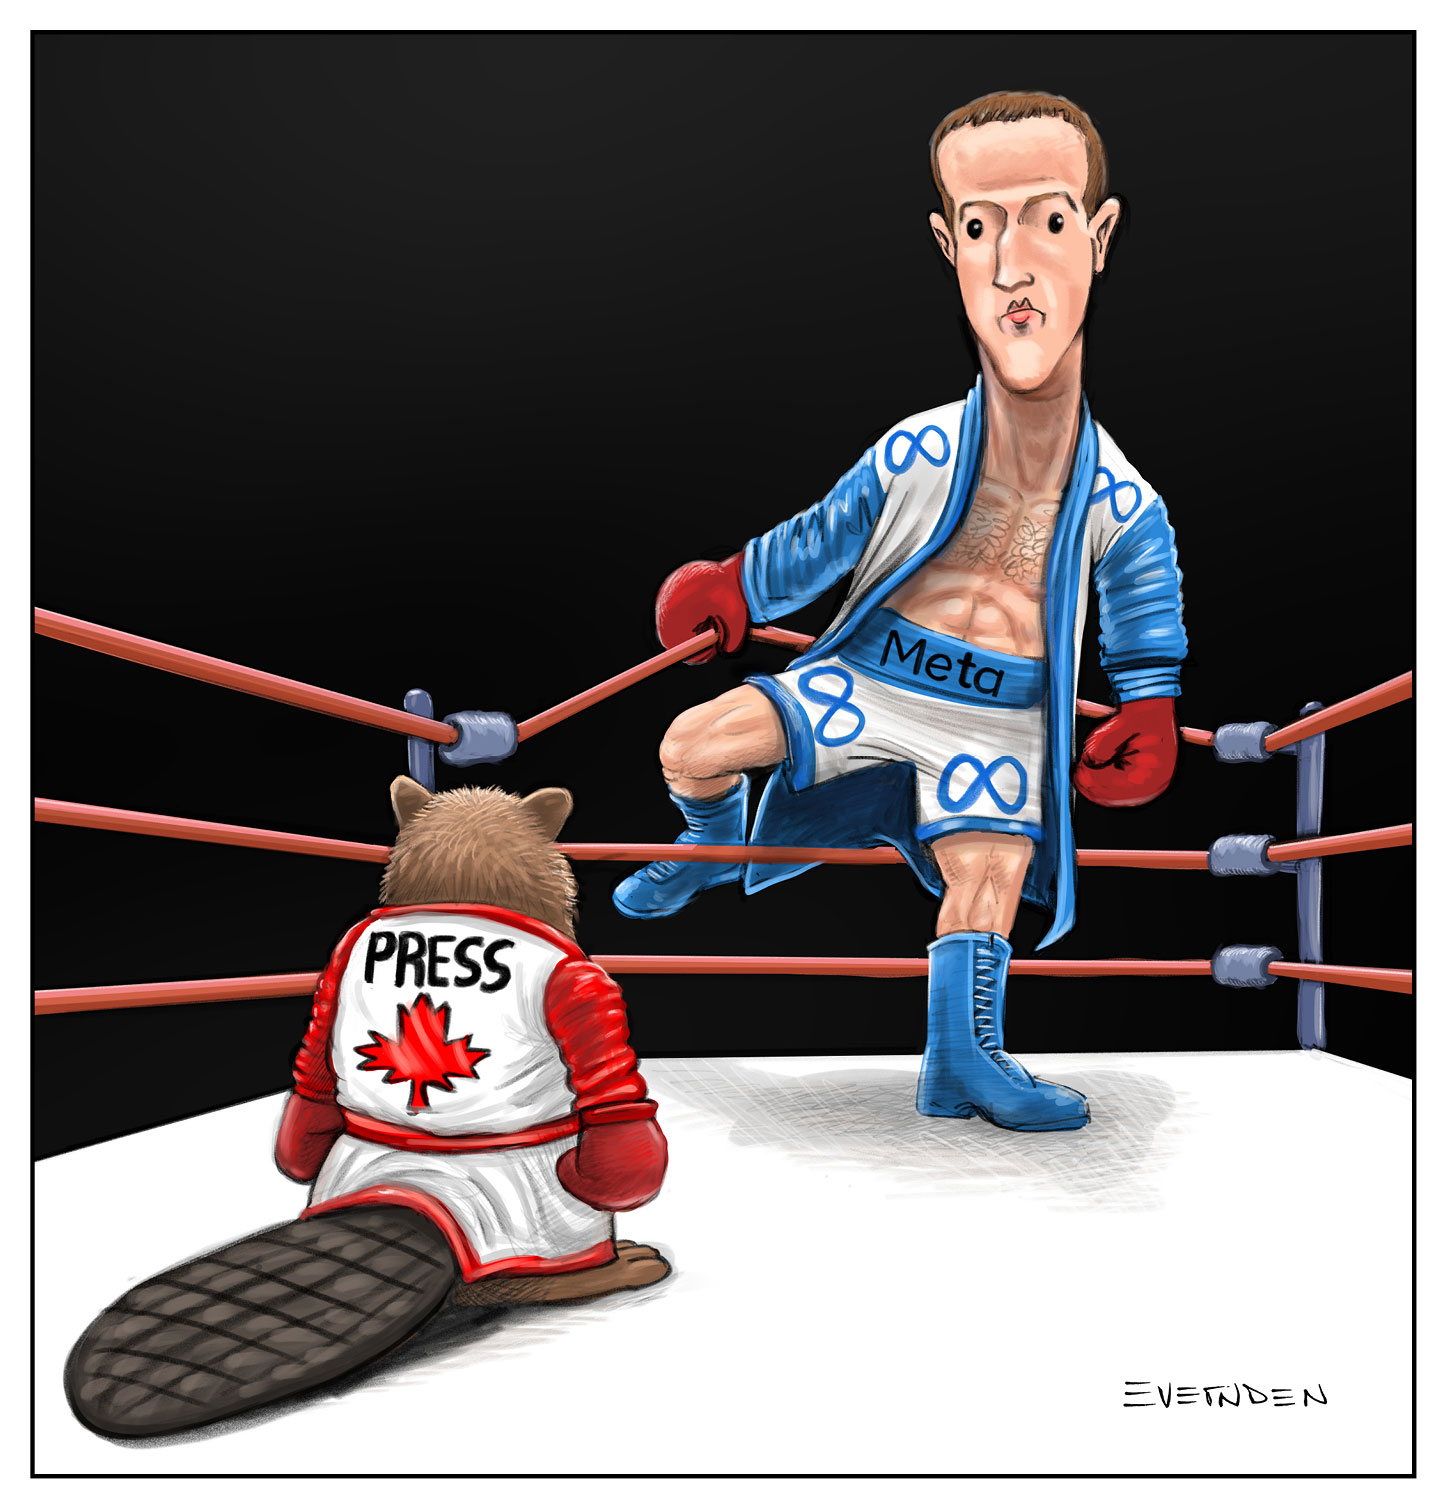 A cartoon of Mark Zuckerberg facing off against a beaver in a wrestling ring. “Press” and a maple leaf are on the back of the beaver’s shirt. “Meta” and infiny symbols are on Zuckerberg outfit. 